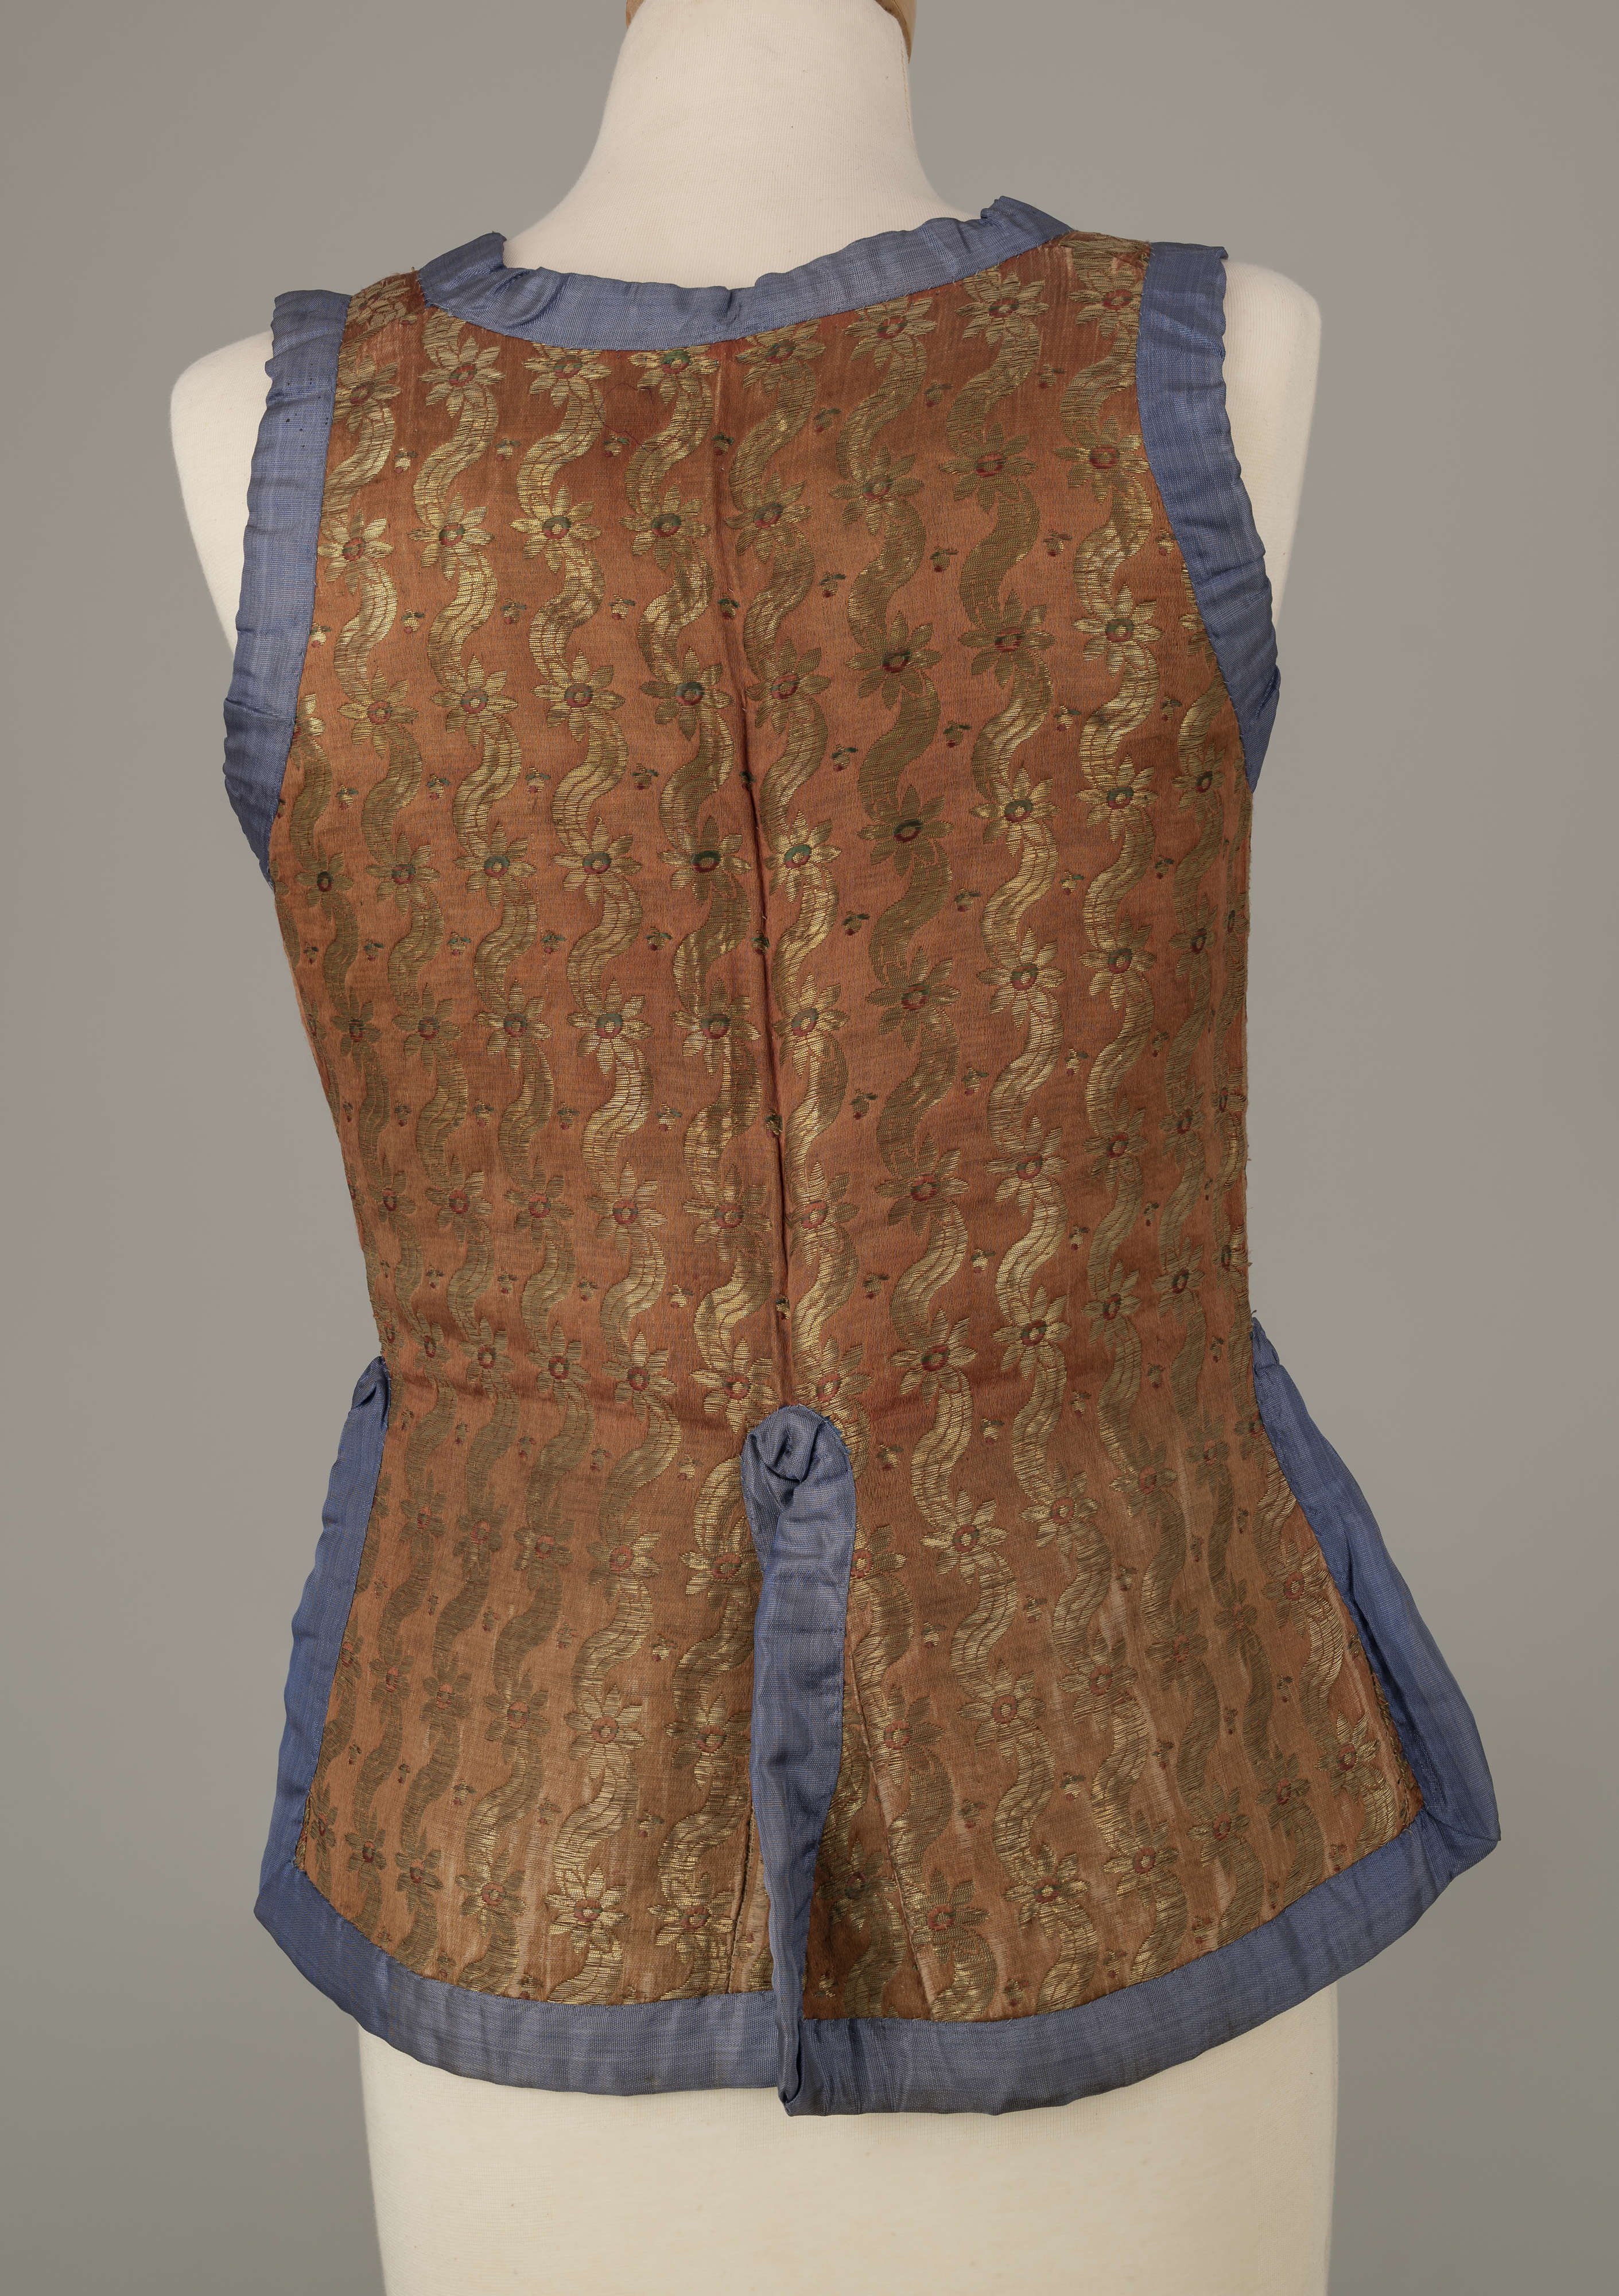 Corset E/793/ML – In museums